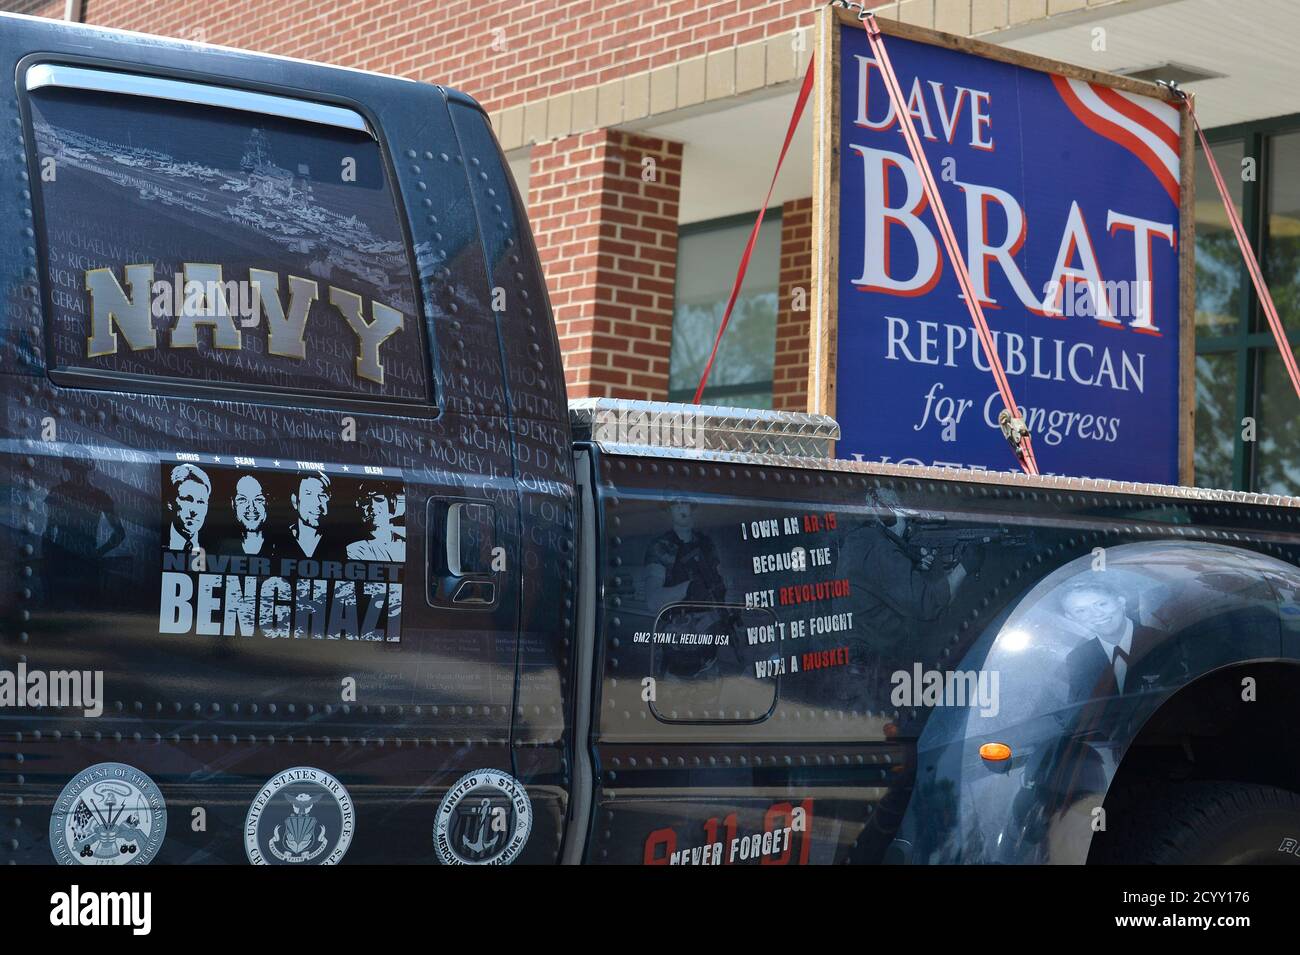 A truck driven by a supporter for Tea Party candidate Dave Brat's campaign is parked in front of his headquarters in Glen Allen, Virginia, June 11, 2014. Brat defeated U.S. House Majority Leader Eric Cantor in a surprise primary upset for the Republican seat in suburban Richmond.   REUTERS/Mike Theiler   (UNITED STATES - Tags: POLITICS ELECTIONS) Stock Photo